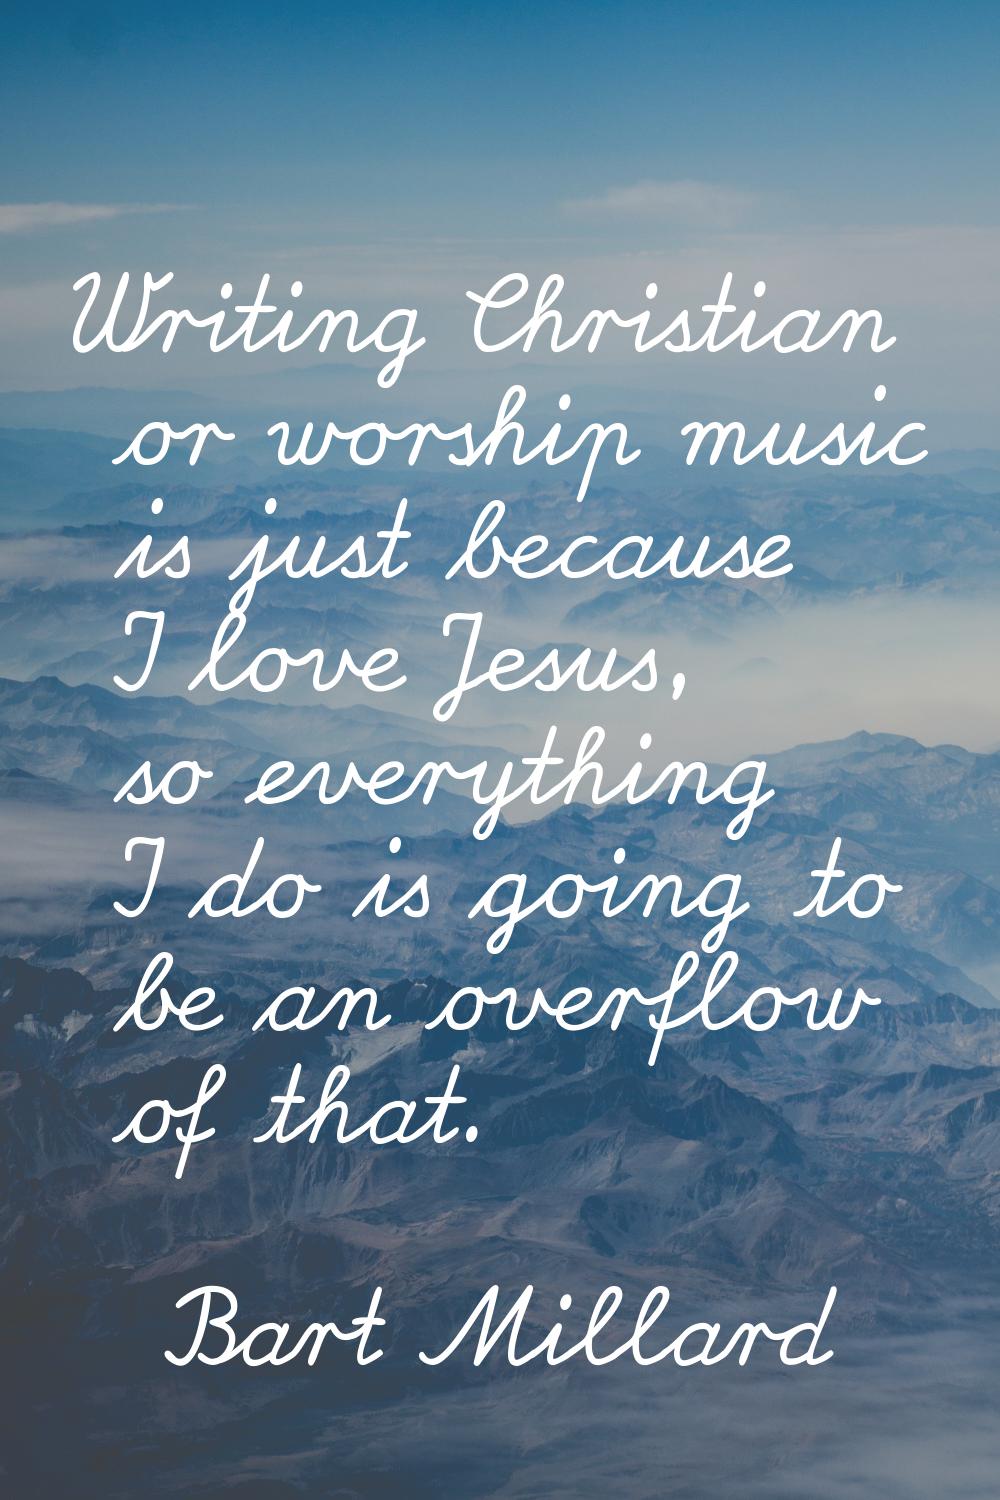 Writing Christian or worship music is just because I love Jesus, so everything I do is going to be 